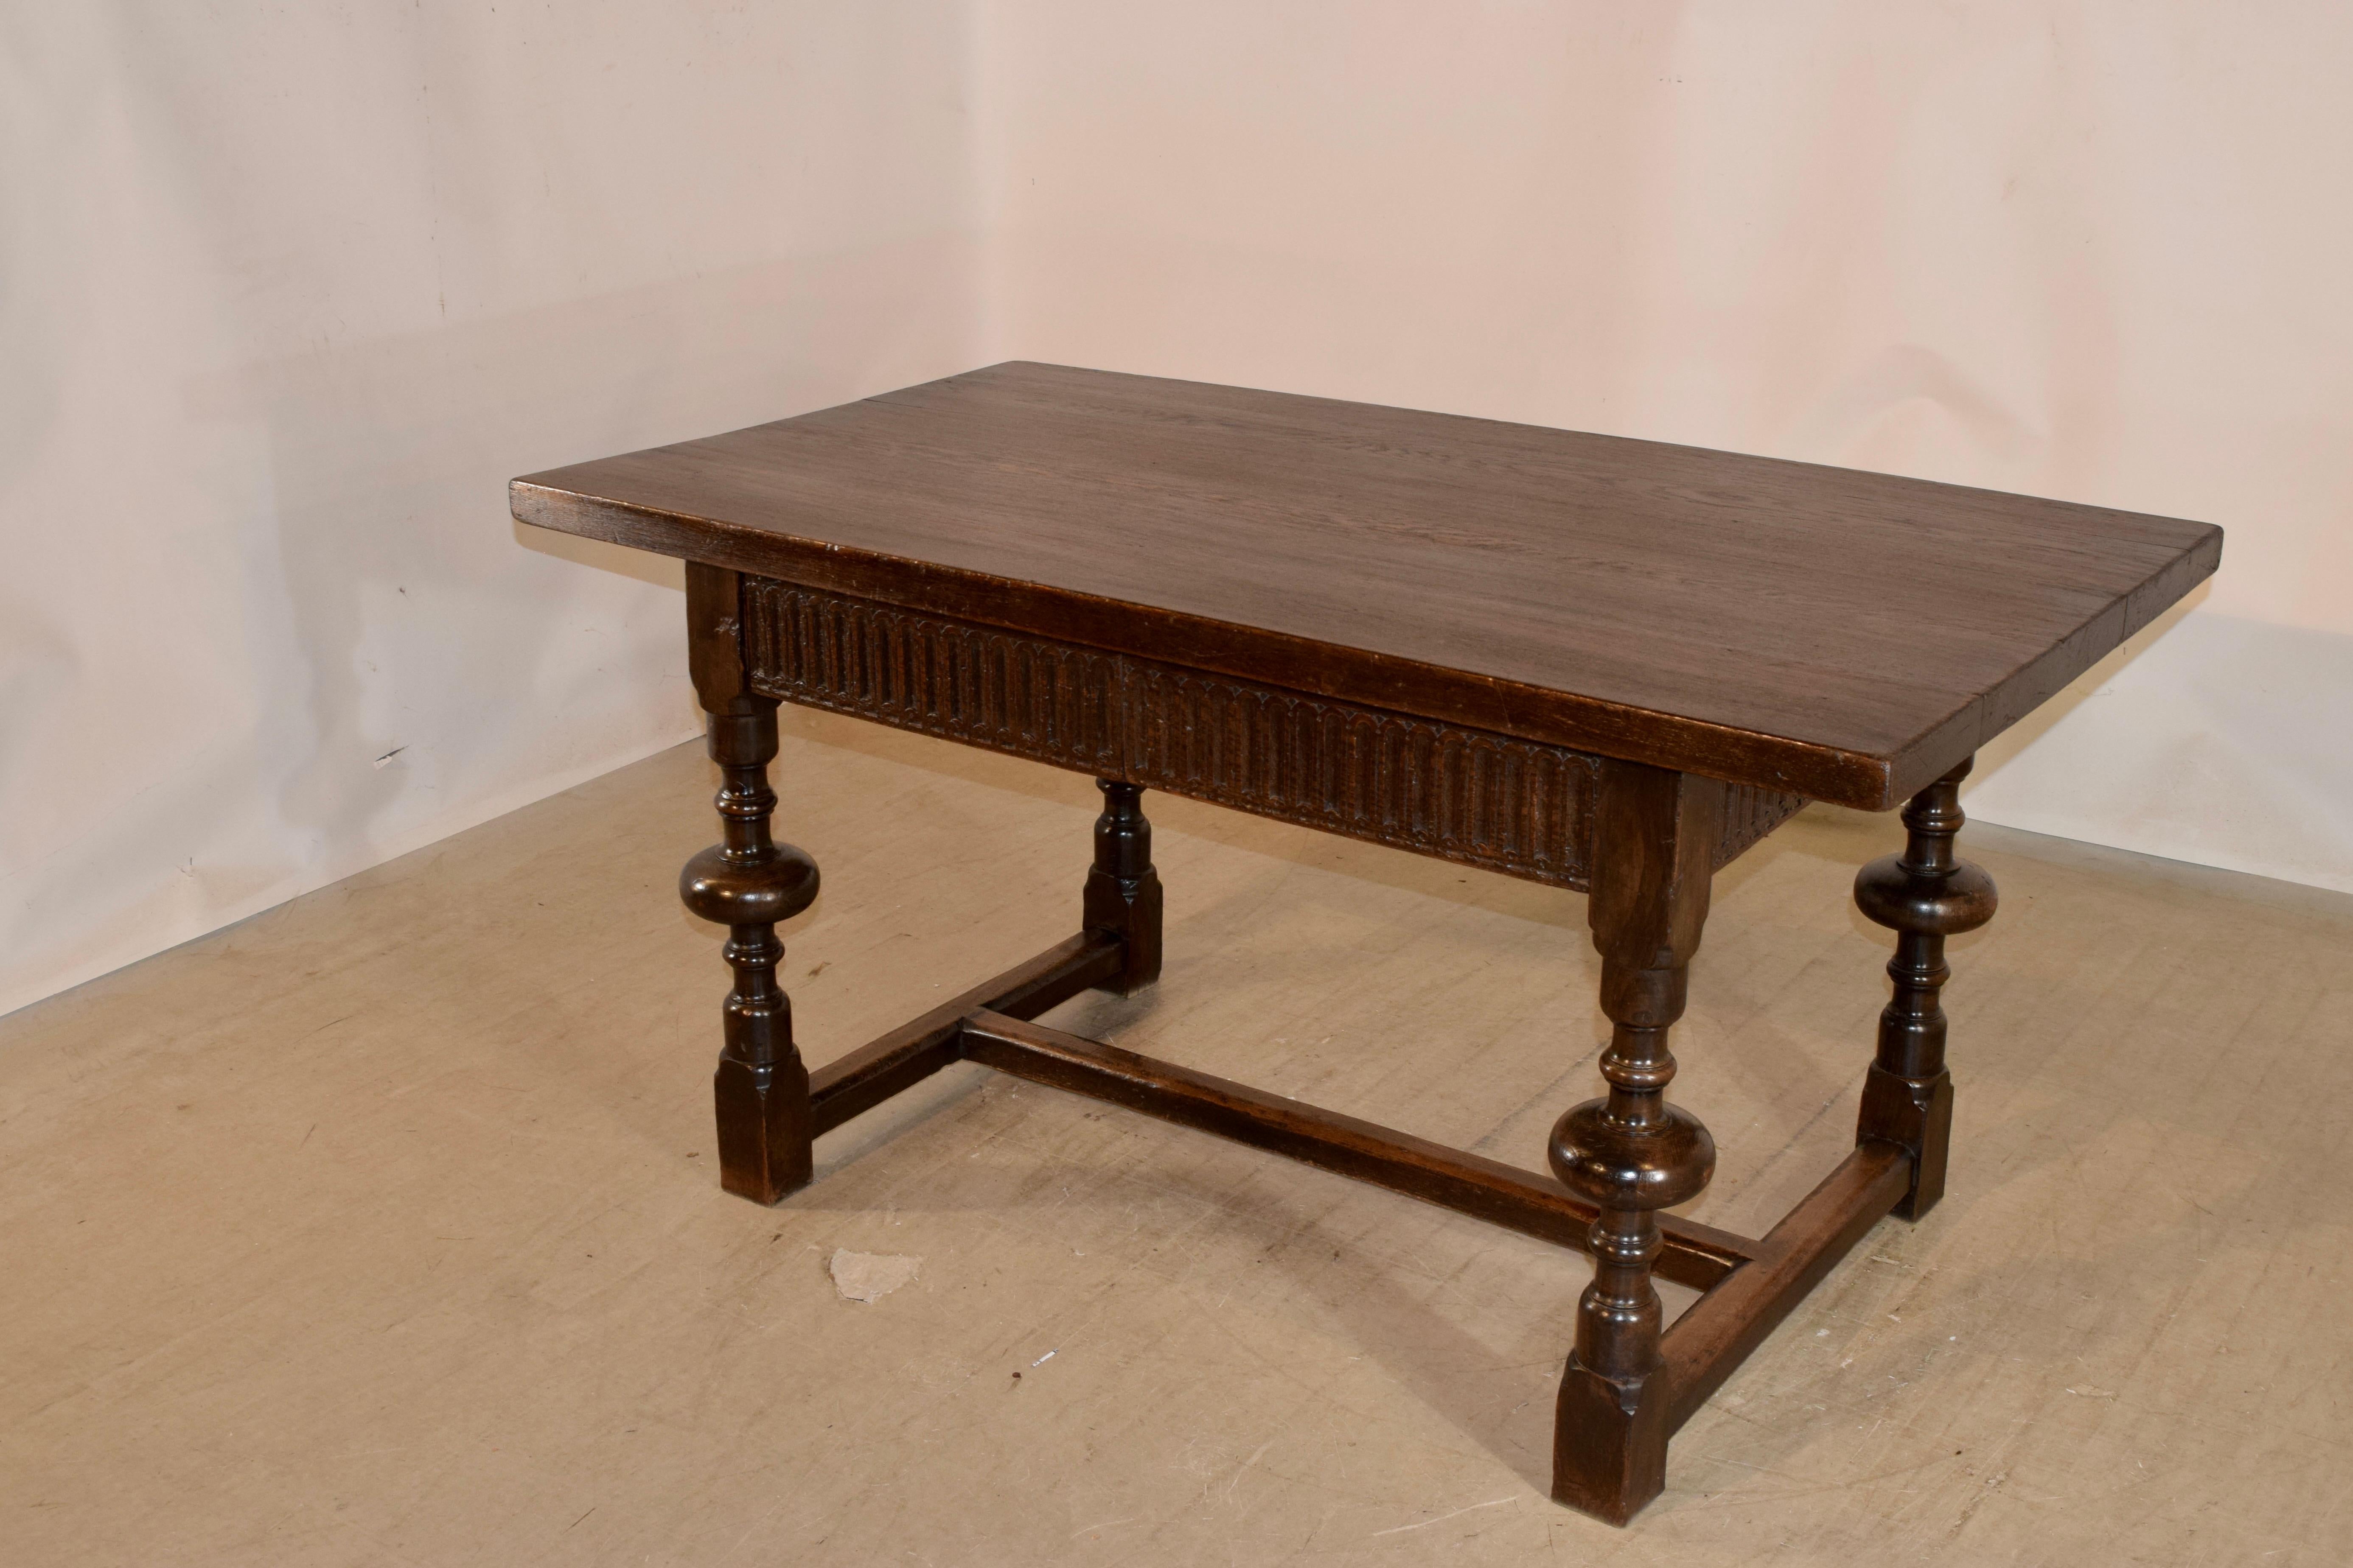 19th Century English Oak Desk with Two Drawers In Good Condition For Sale In High Point, NC